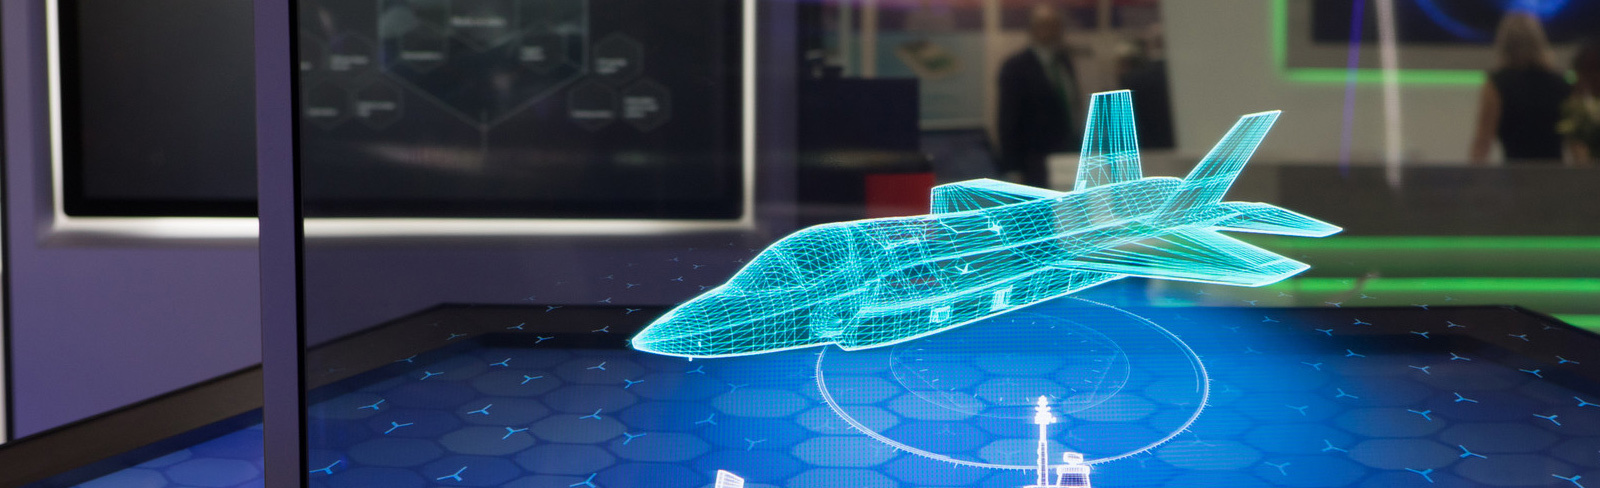 Hologram of F35 at DSEI 2021